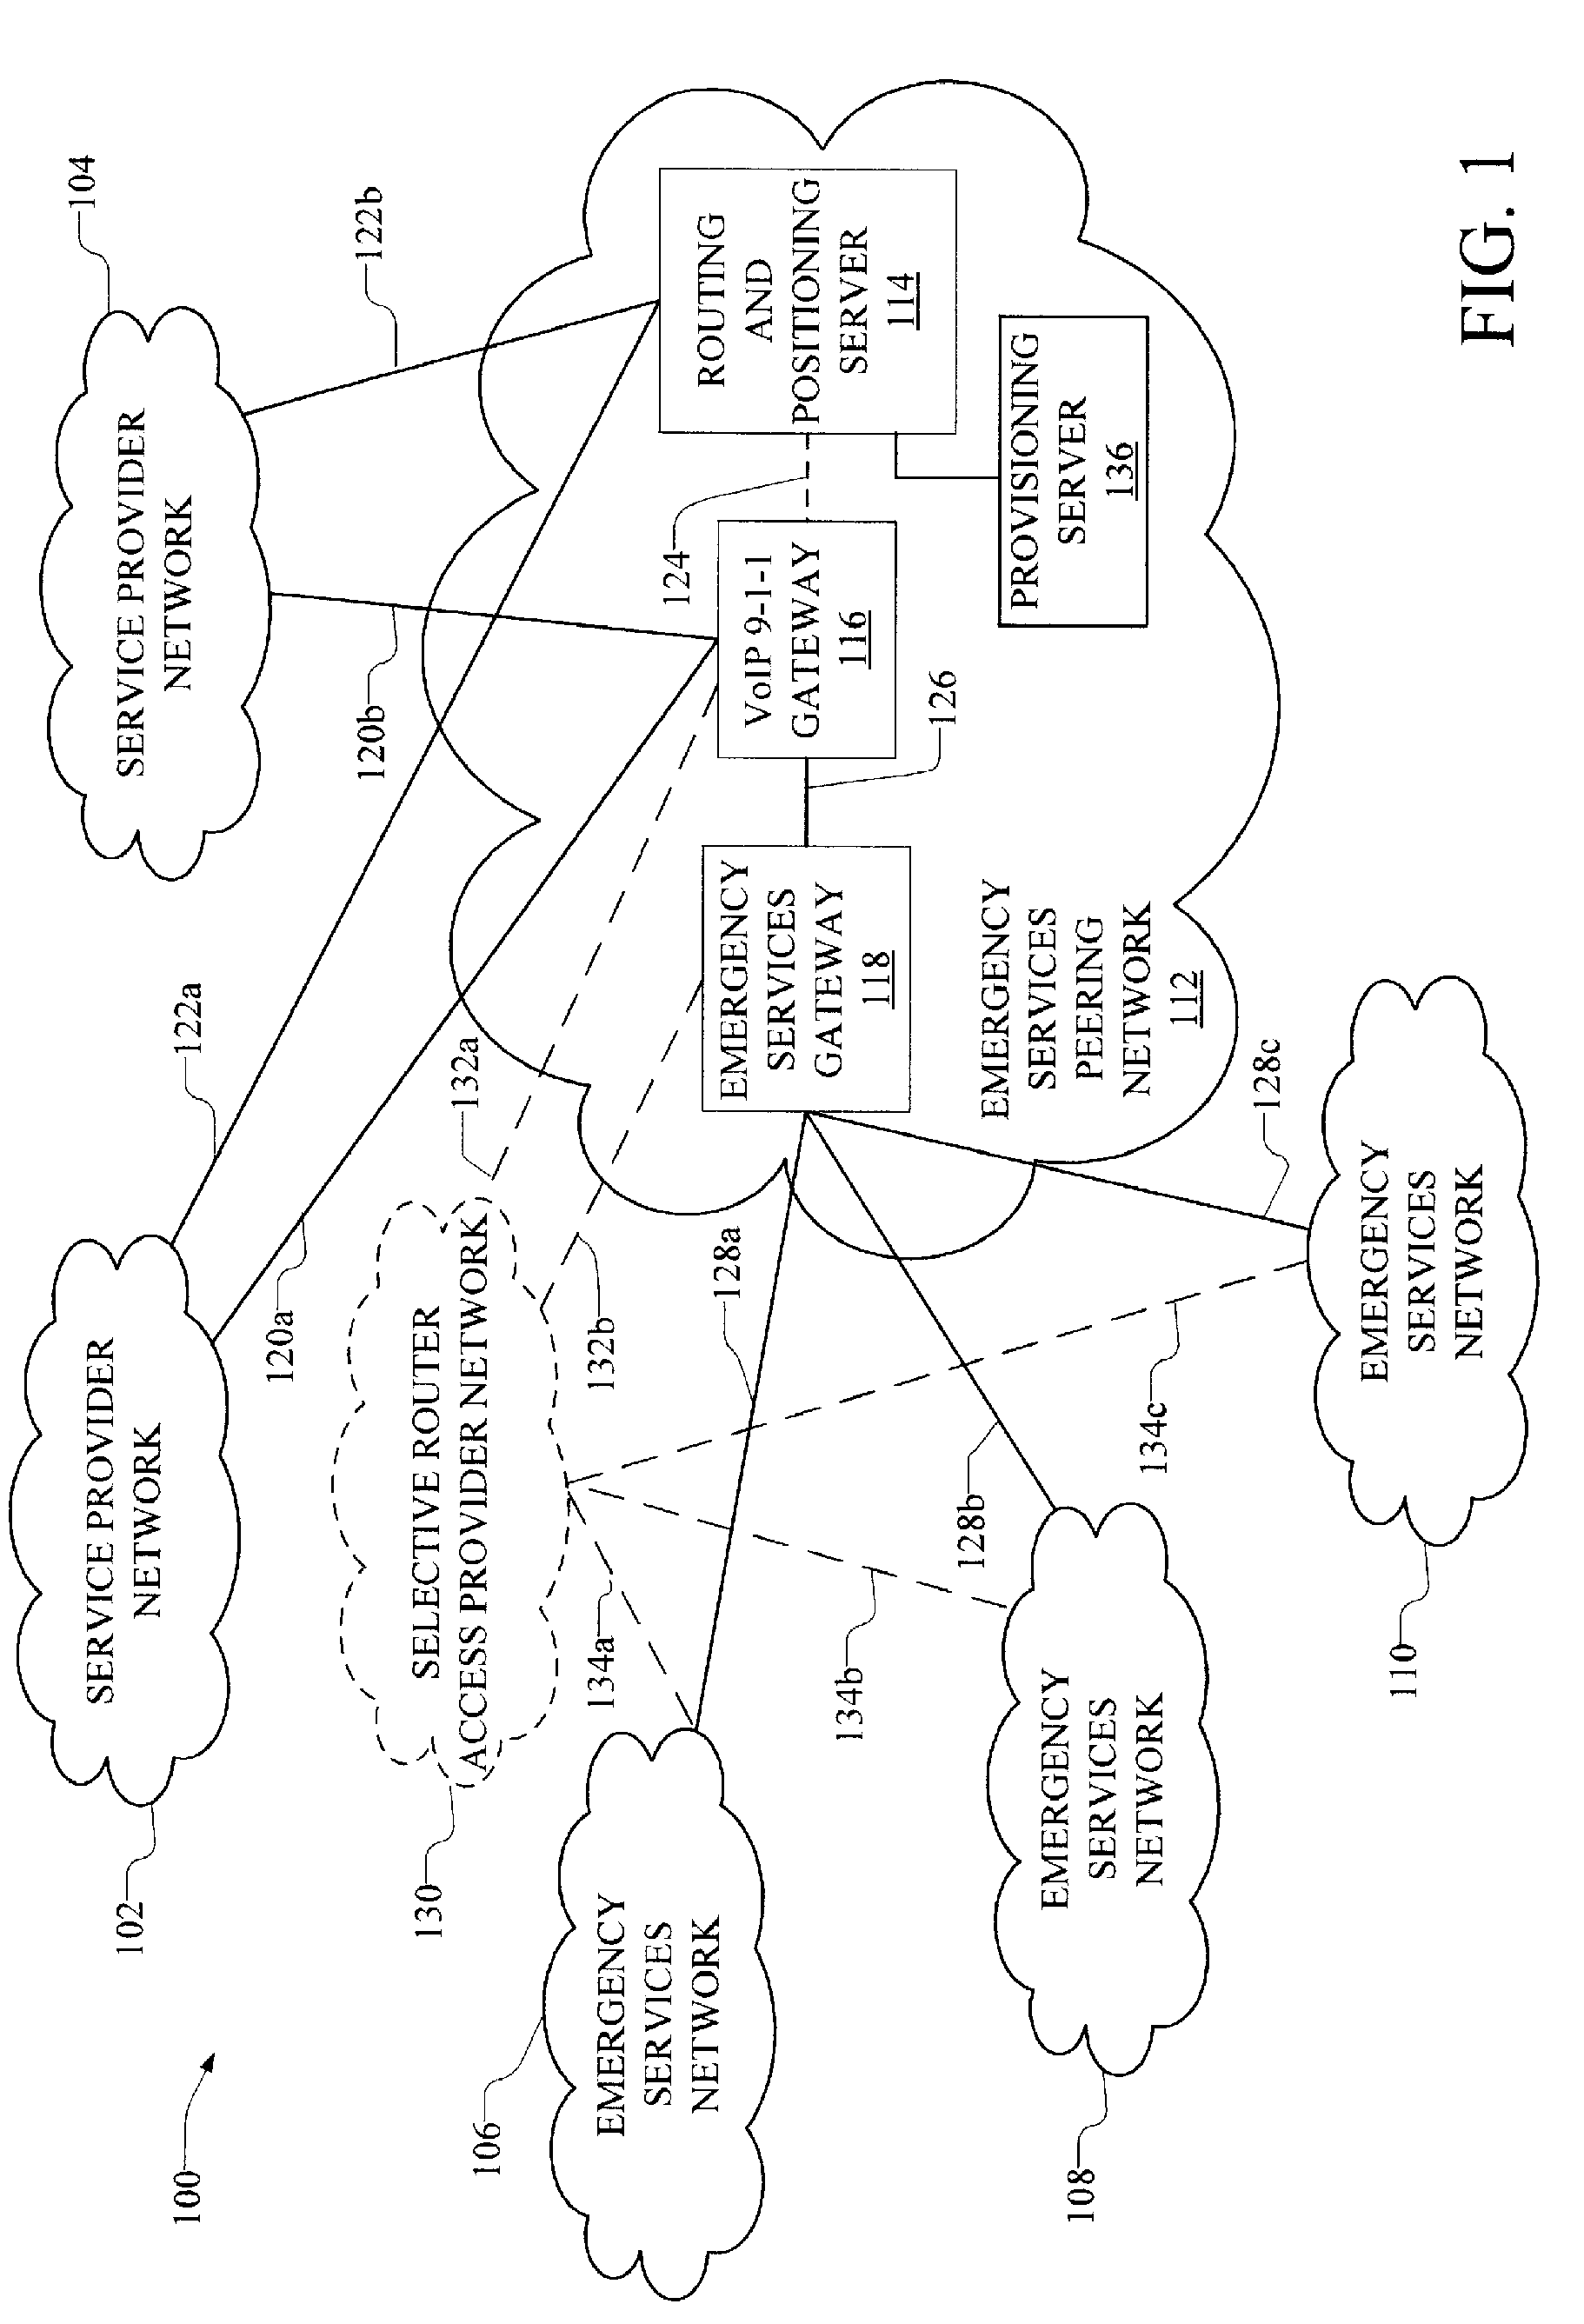 Peering Network for Parameter-Based Routing of Special Number Calls